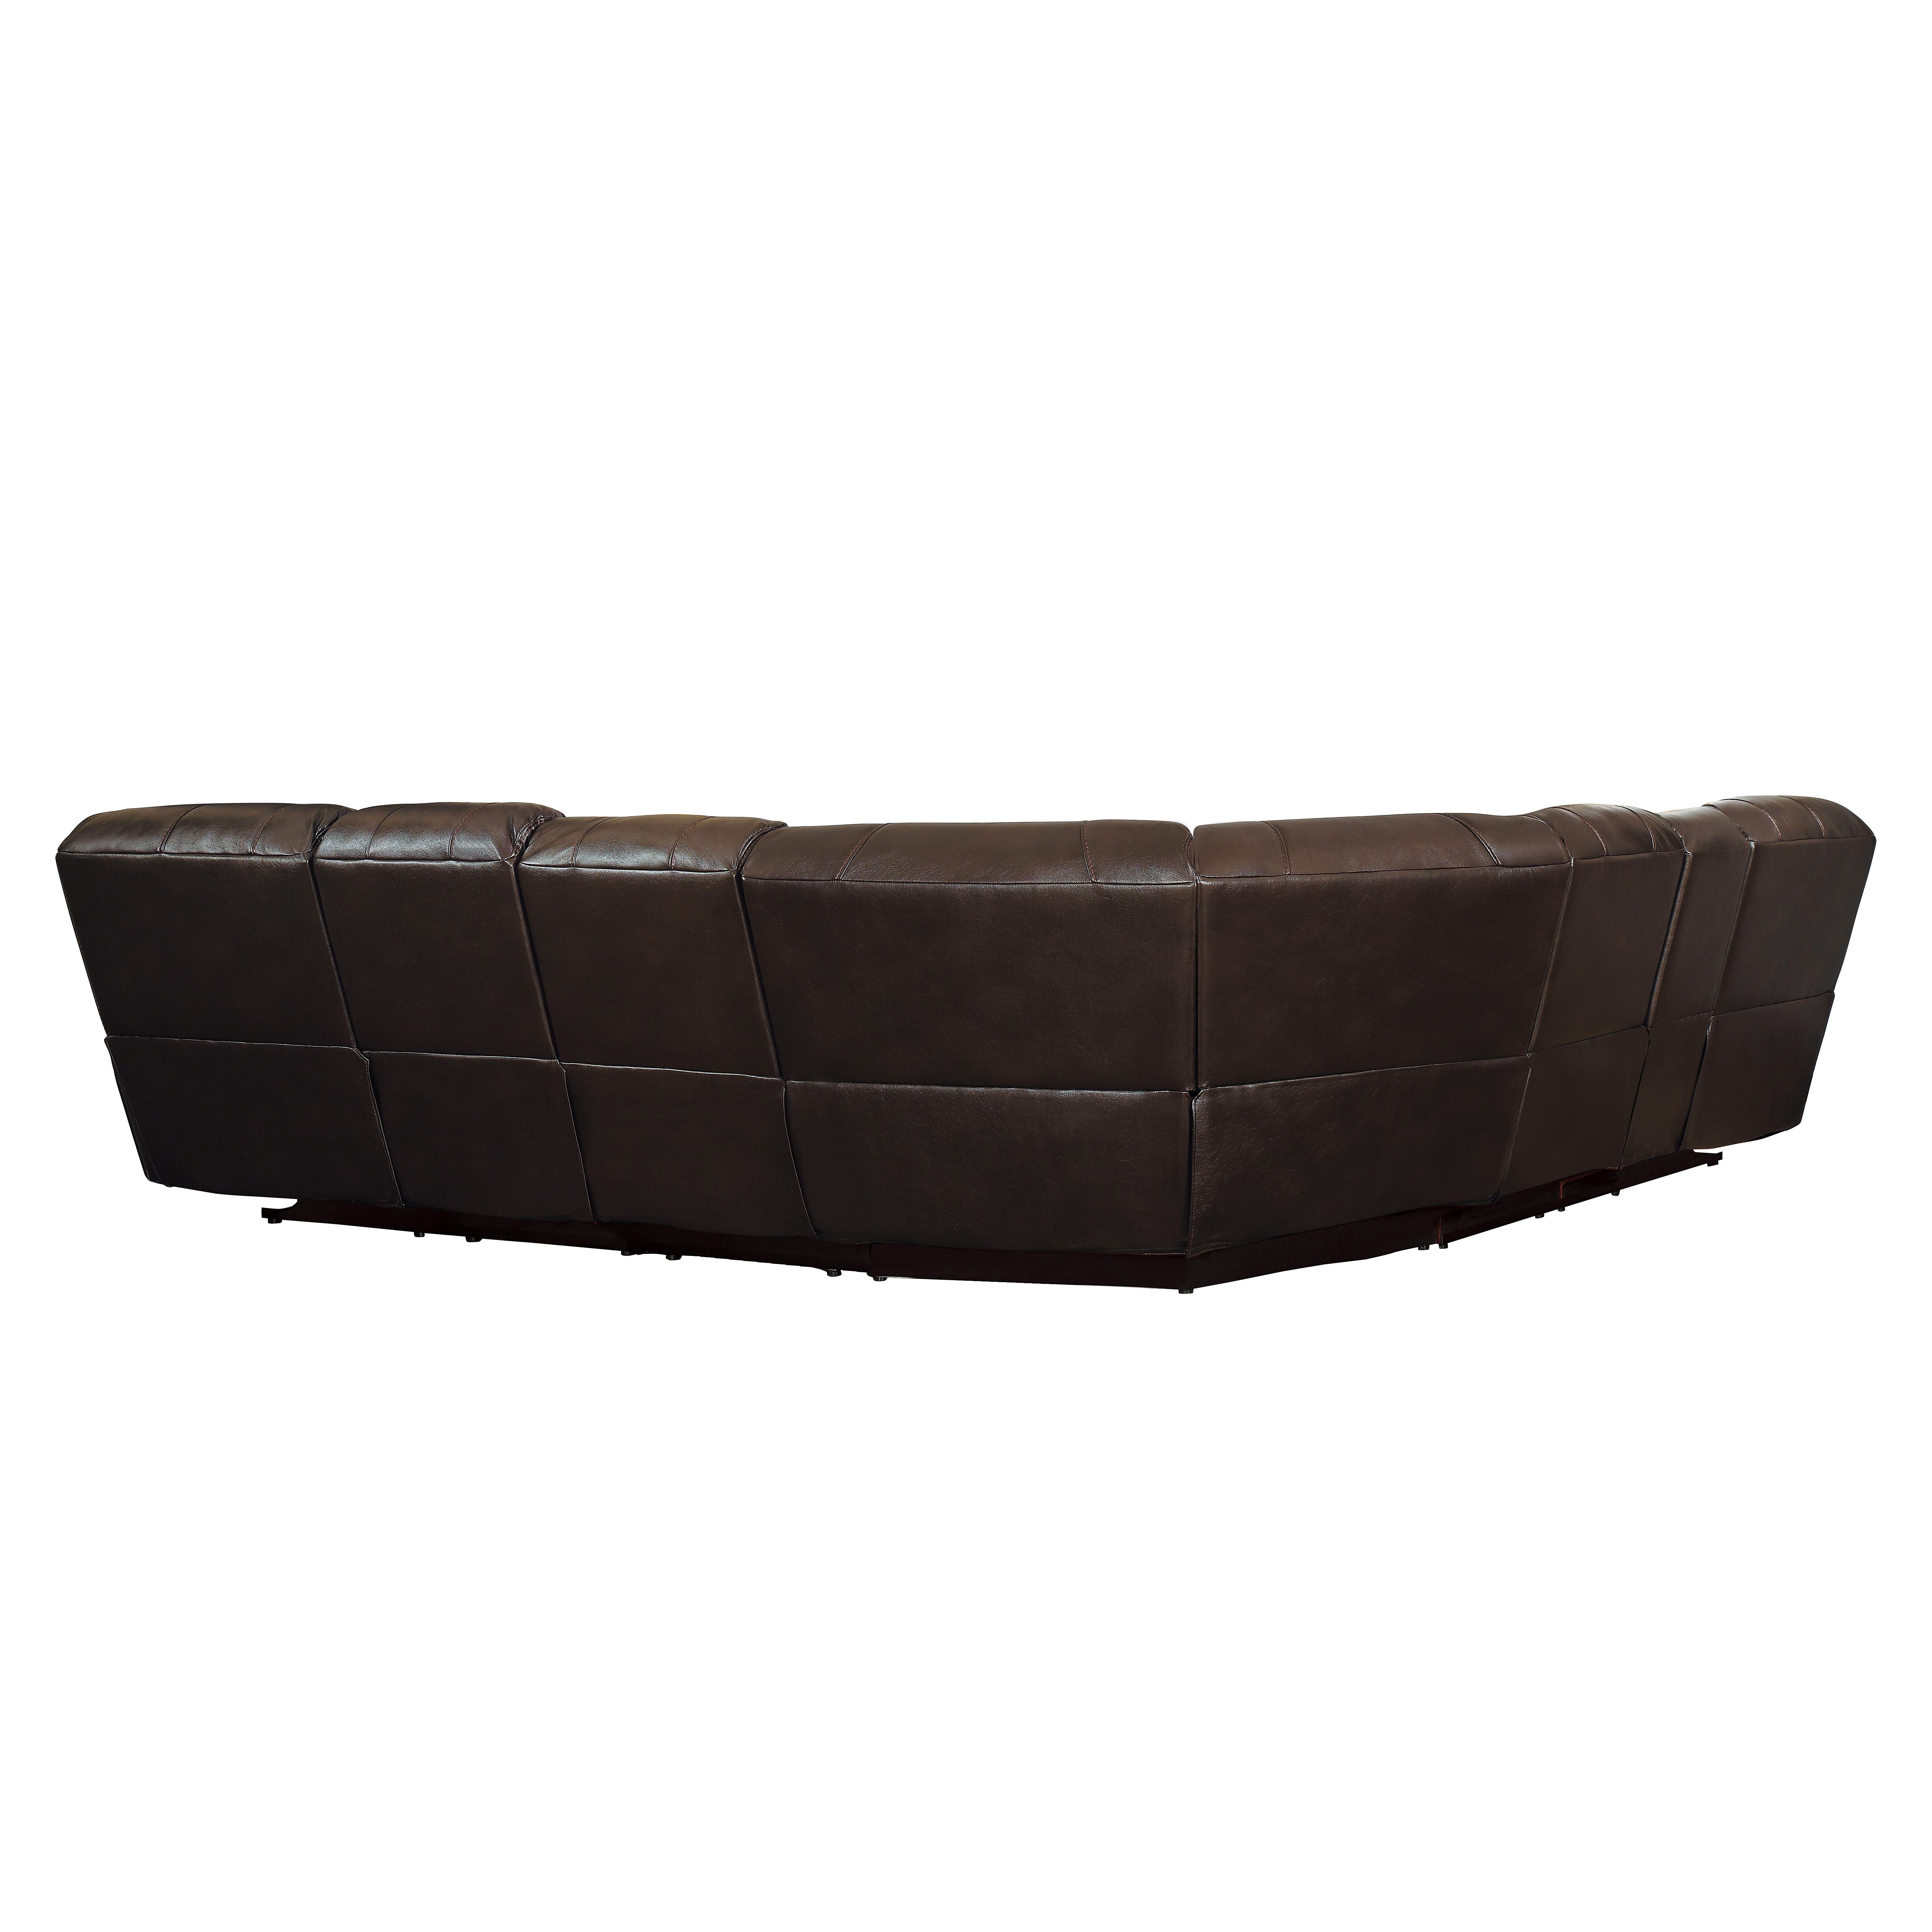 

    
Modern Dark Brown Faux Leather 4-Piece Reclining Sectional Homelegance 8480BRW*4SC Pecos
